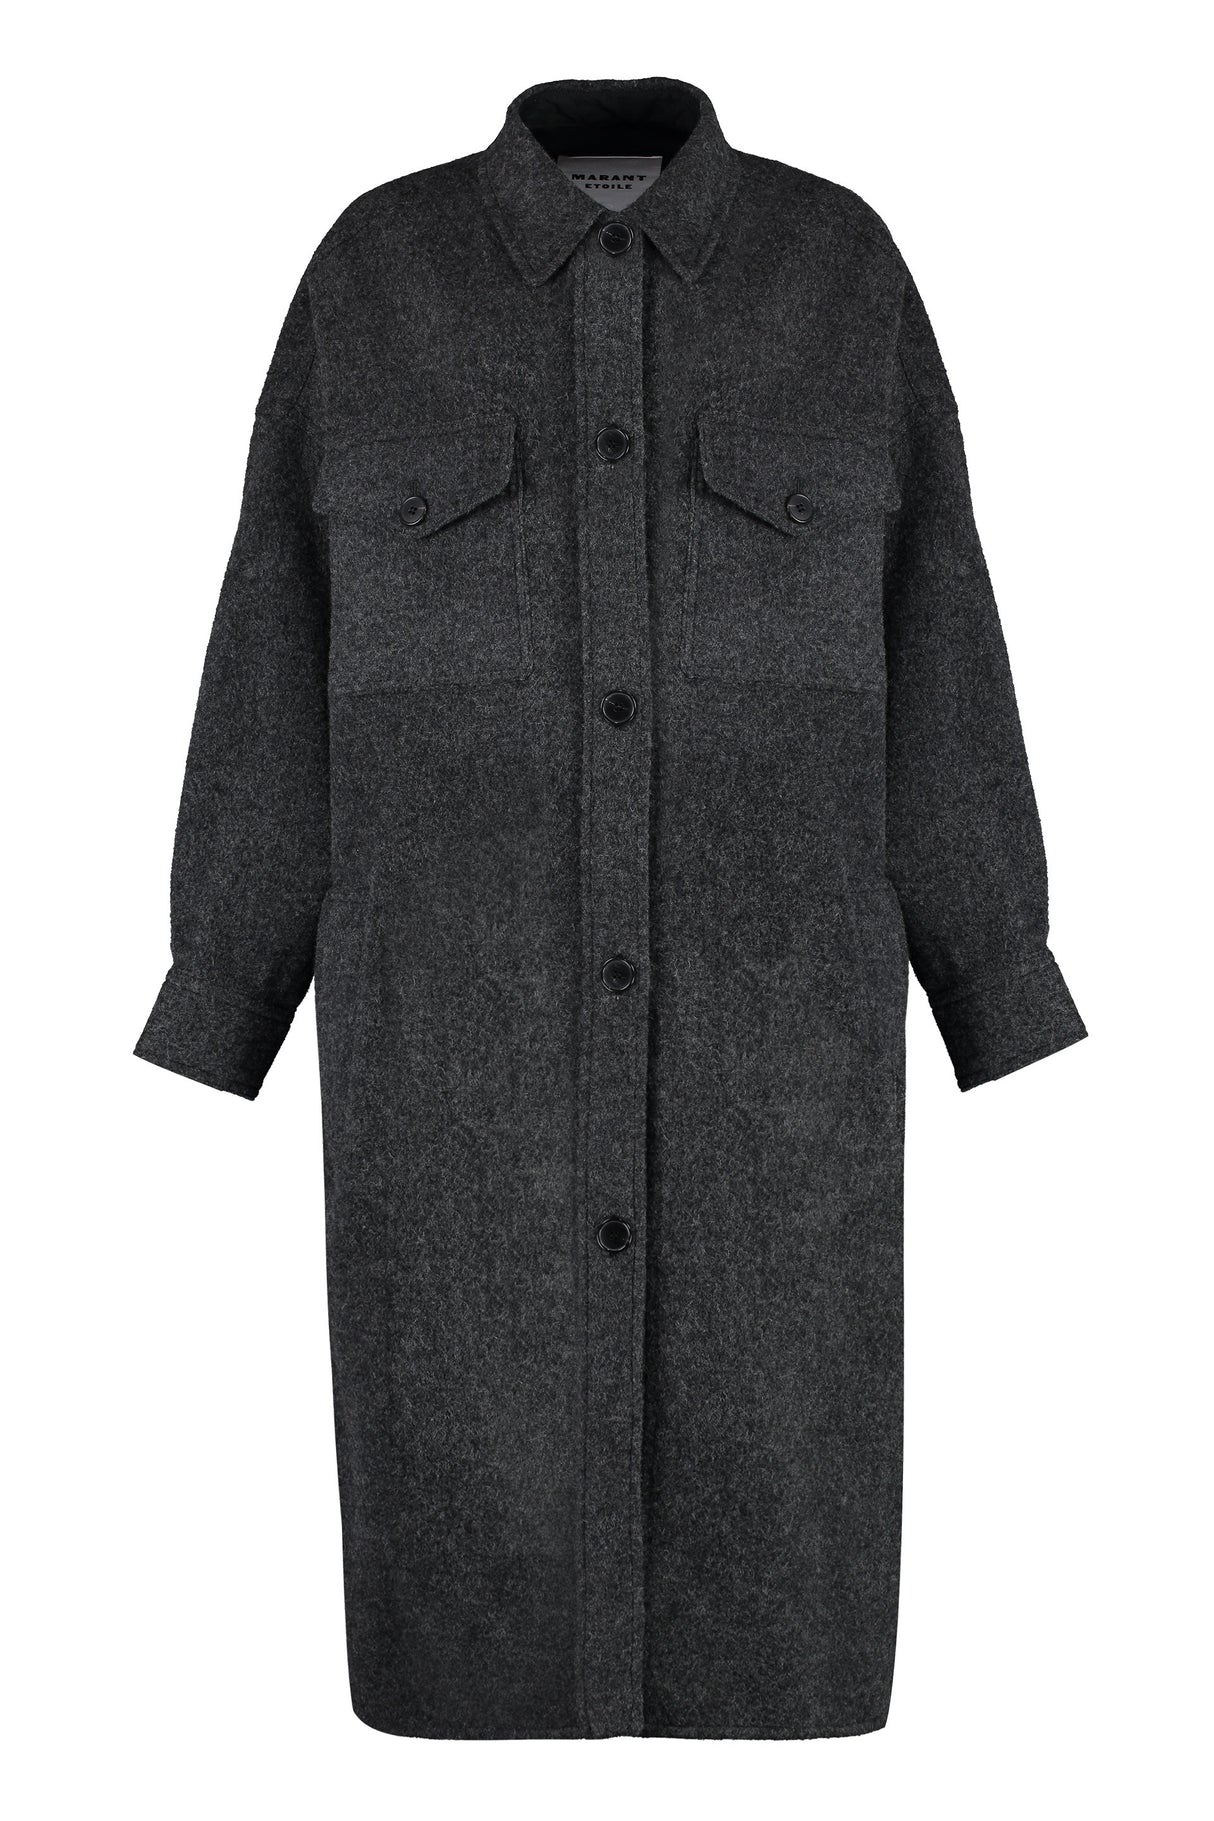 Women's Wool Blend Jacket with Shirt Style Collar and Cuffs - FW23